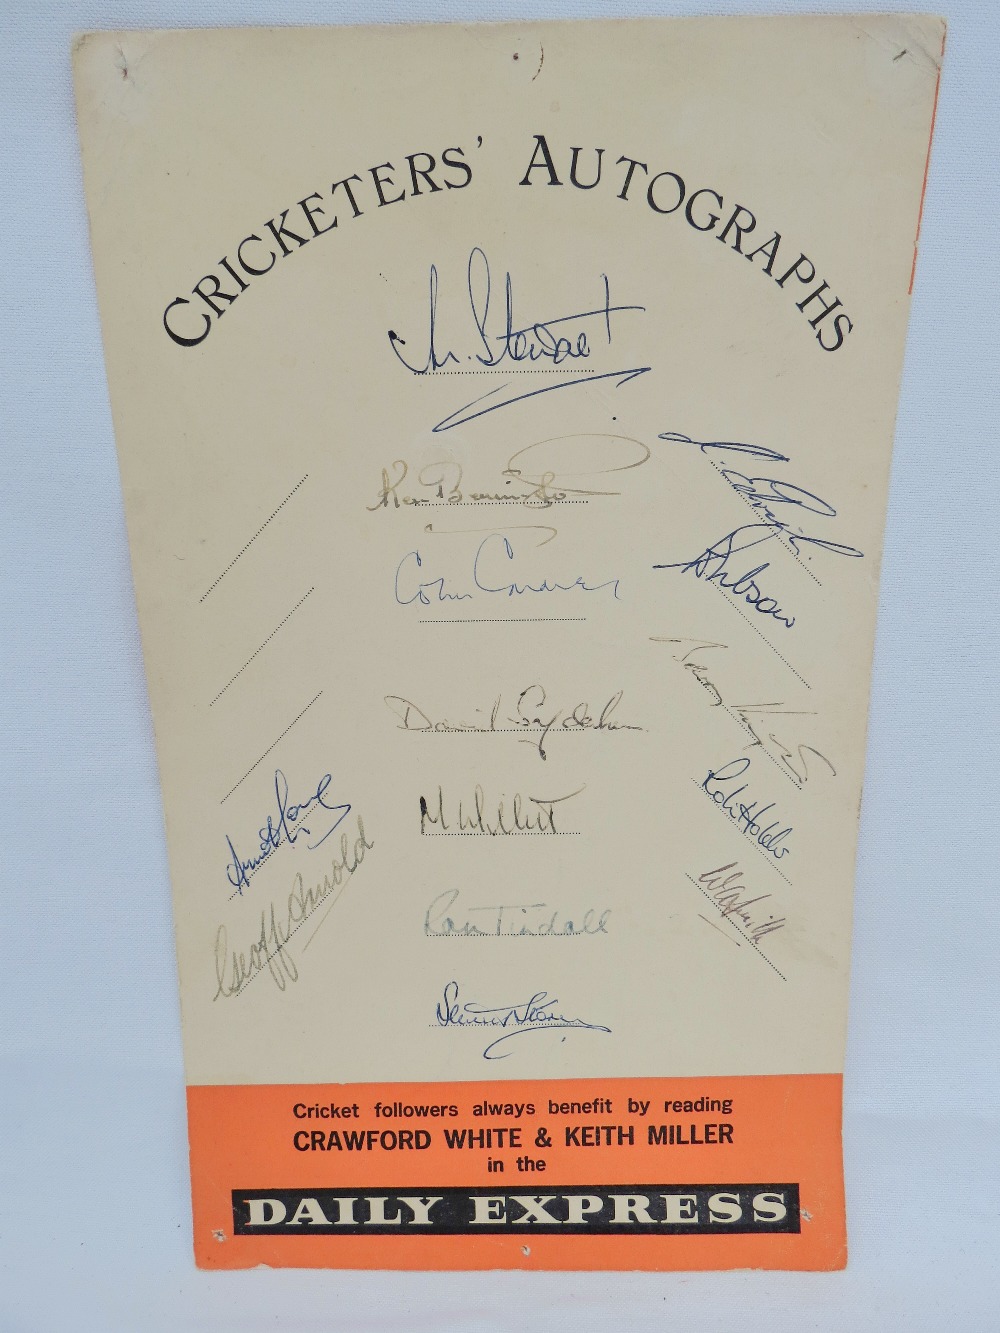 A collection of cricketers` autographs on a card advertising Crawford White and Keith Miller`s